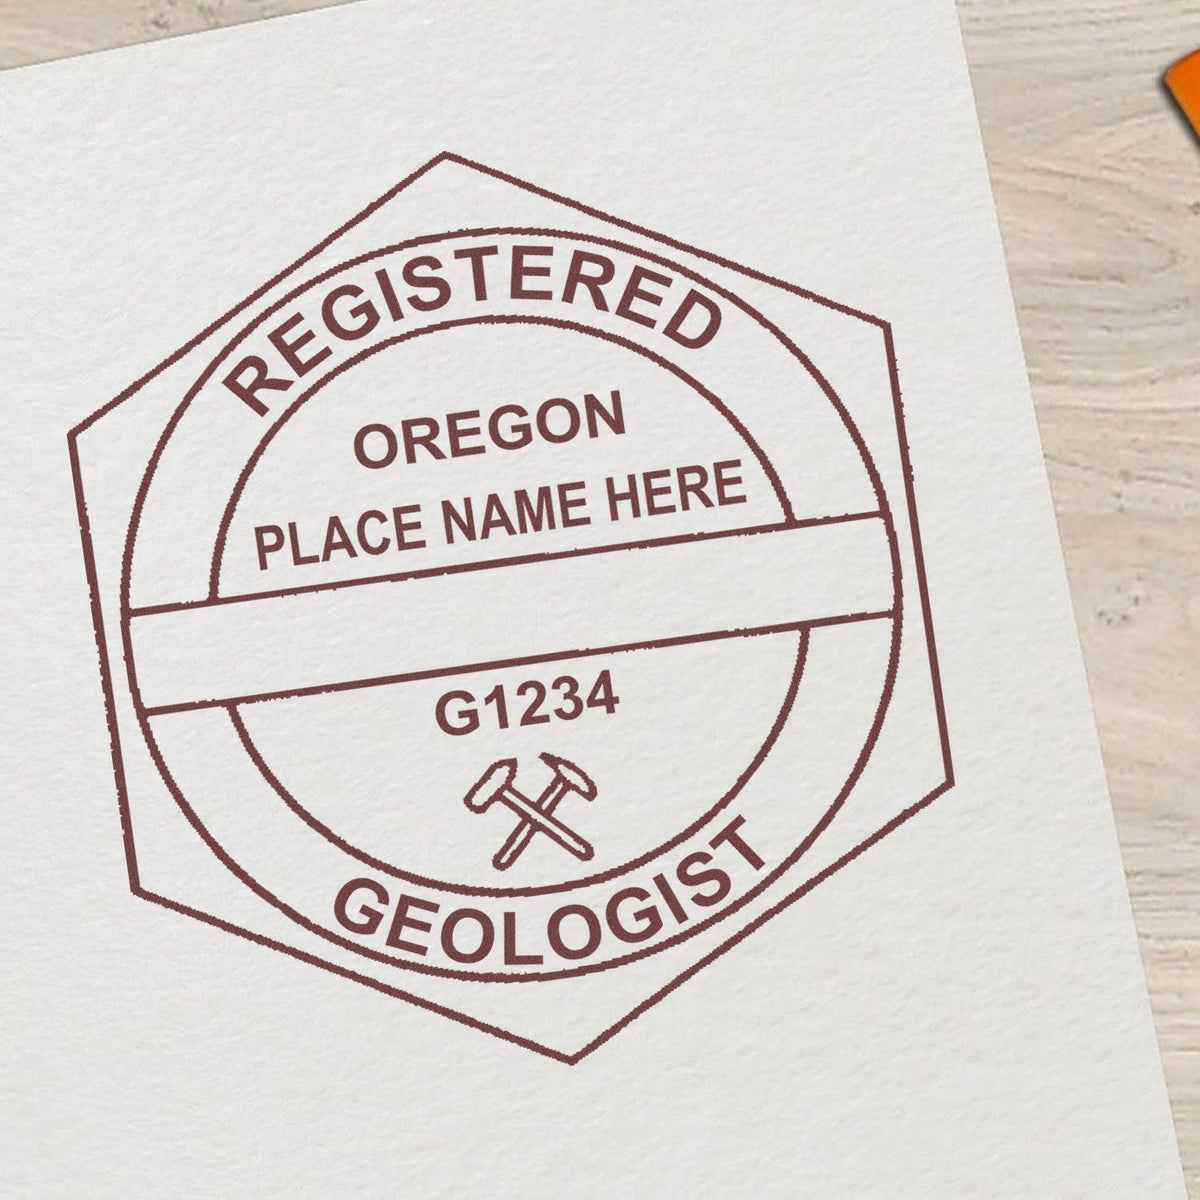 Another Example of a stamped impression of the Oregon Professional Geologist Seal Stamp on a office form